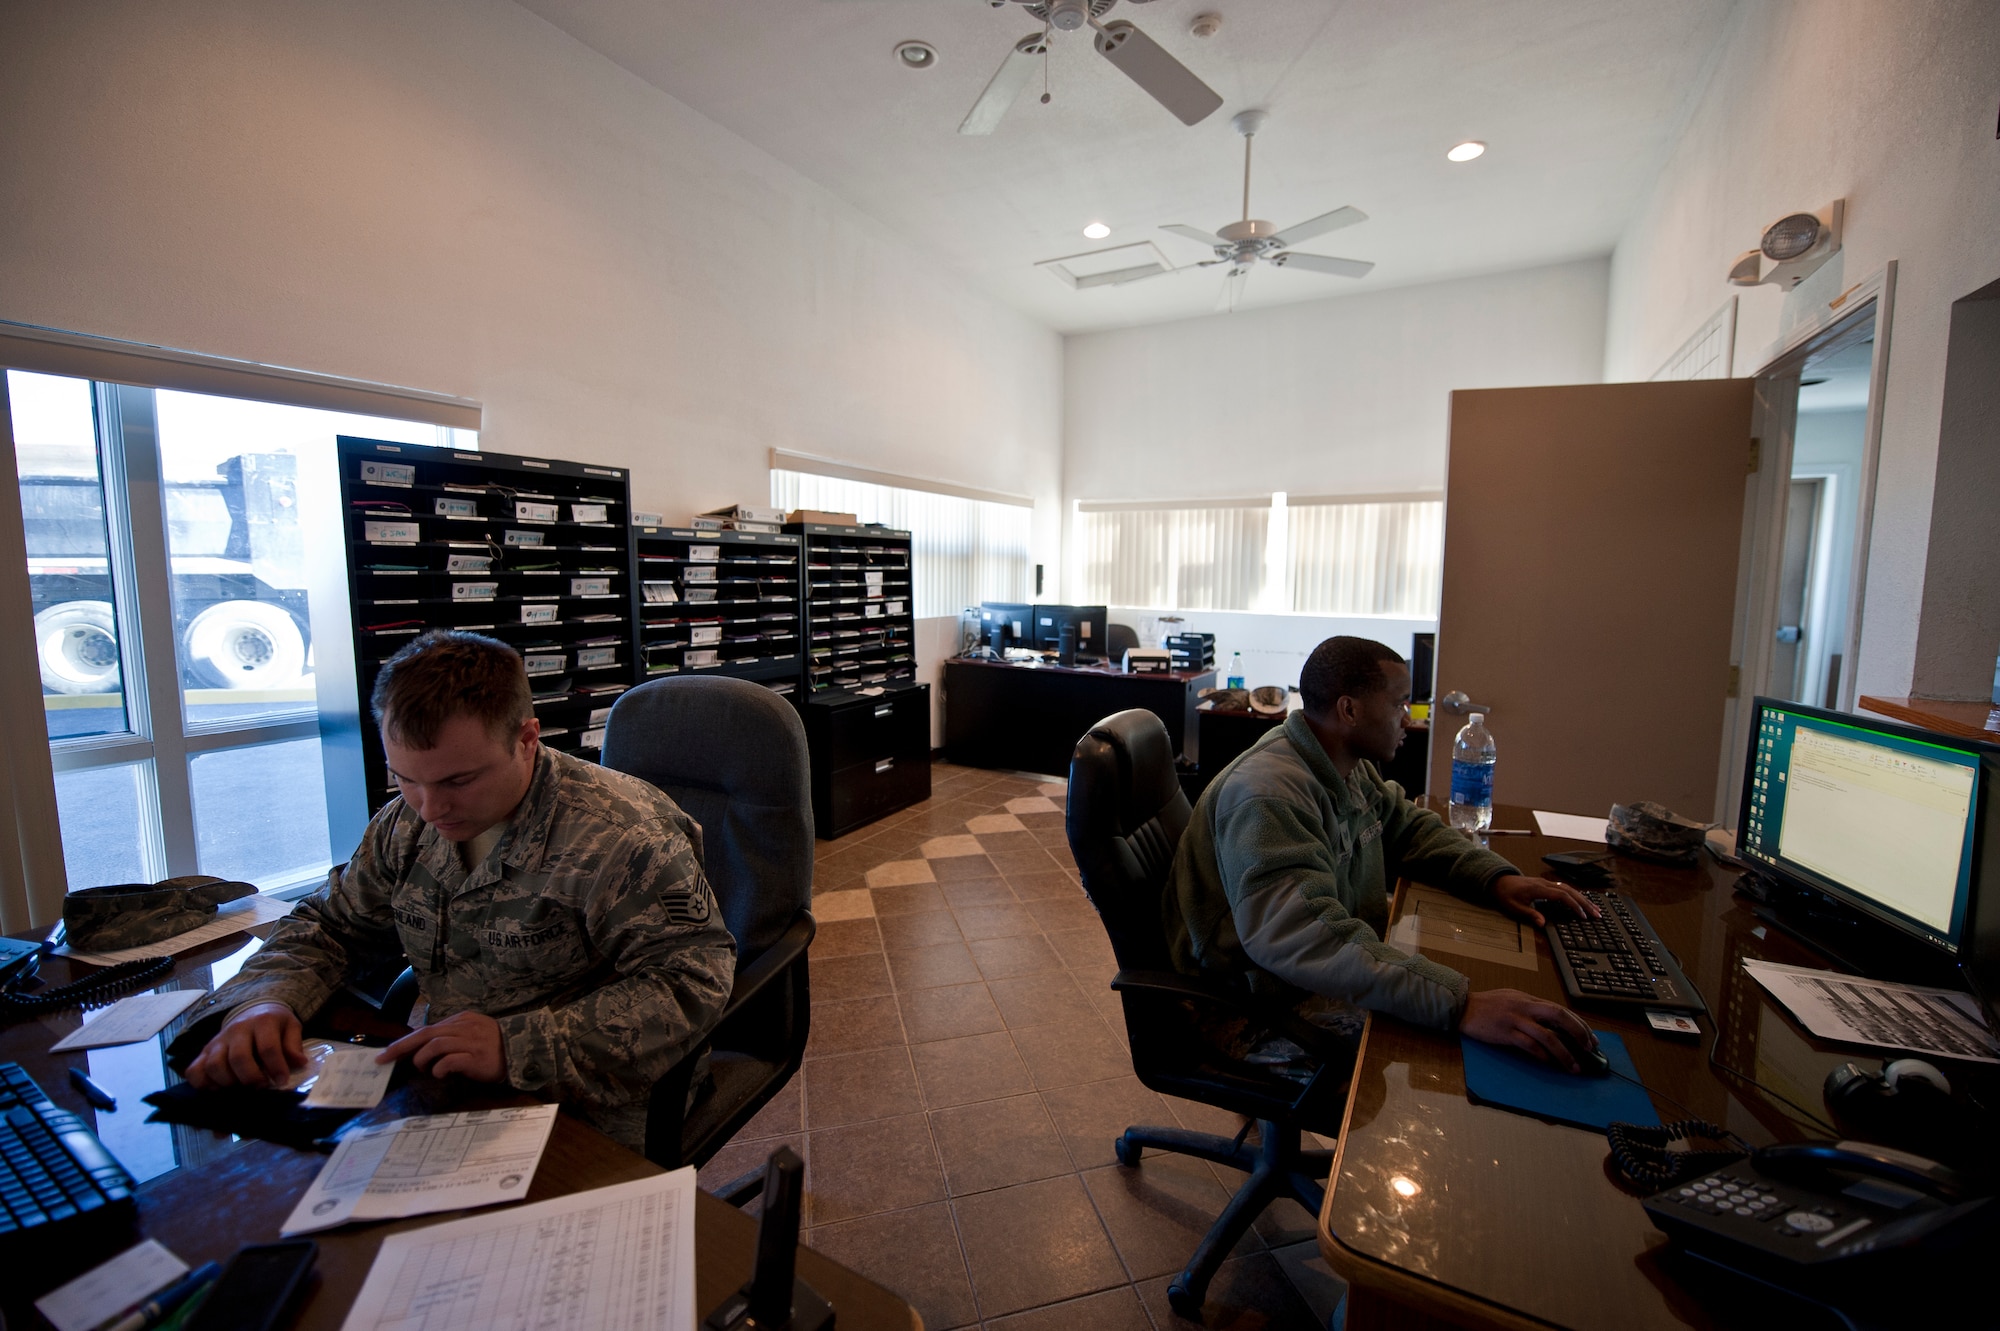 Staff Sgt. William Steenland, left, and Staff Sgt. Isaiah Brown, 99th Logistics Readiness Squadron vehicle dispatchers, process vehicle request forms at the vehicle operations center on Nellis Air Force Base, Nev., Jan. 6, 2015. Approximately 20 to 30 request forms are processed by dispatchers every day. (U.S. Air Force photo by Airman 1st Class Mikaley Towle)